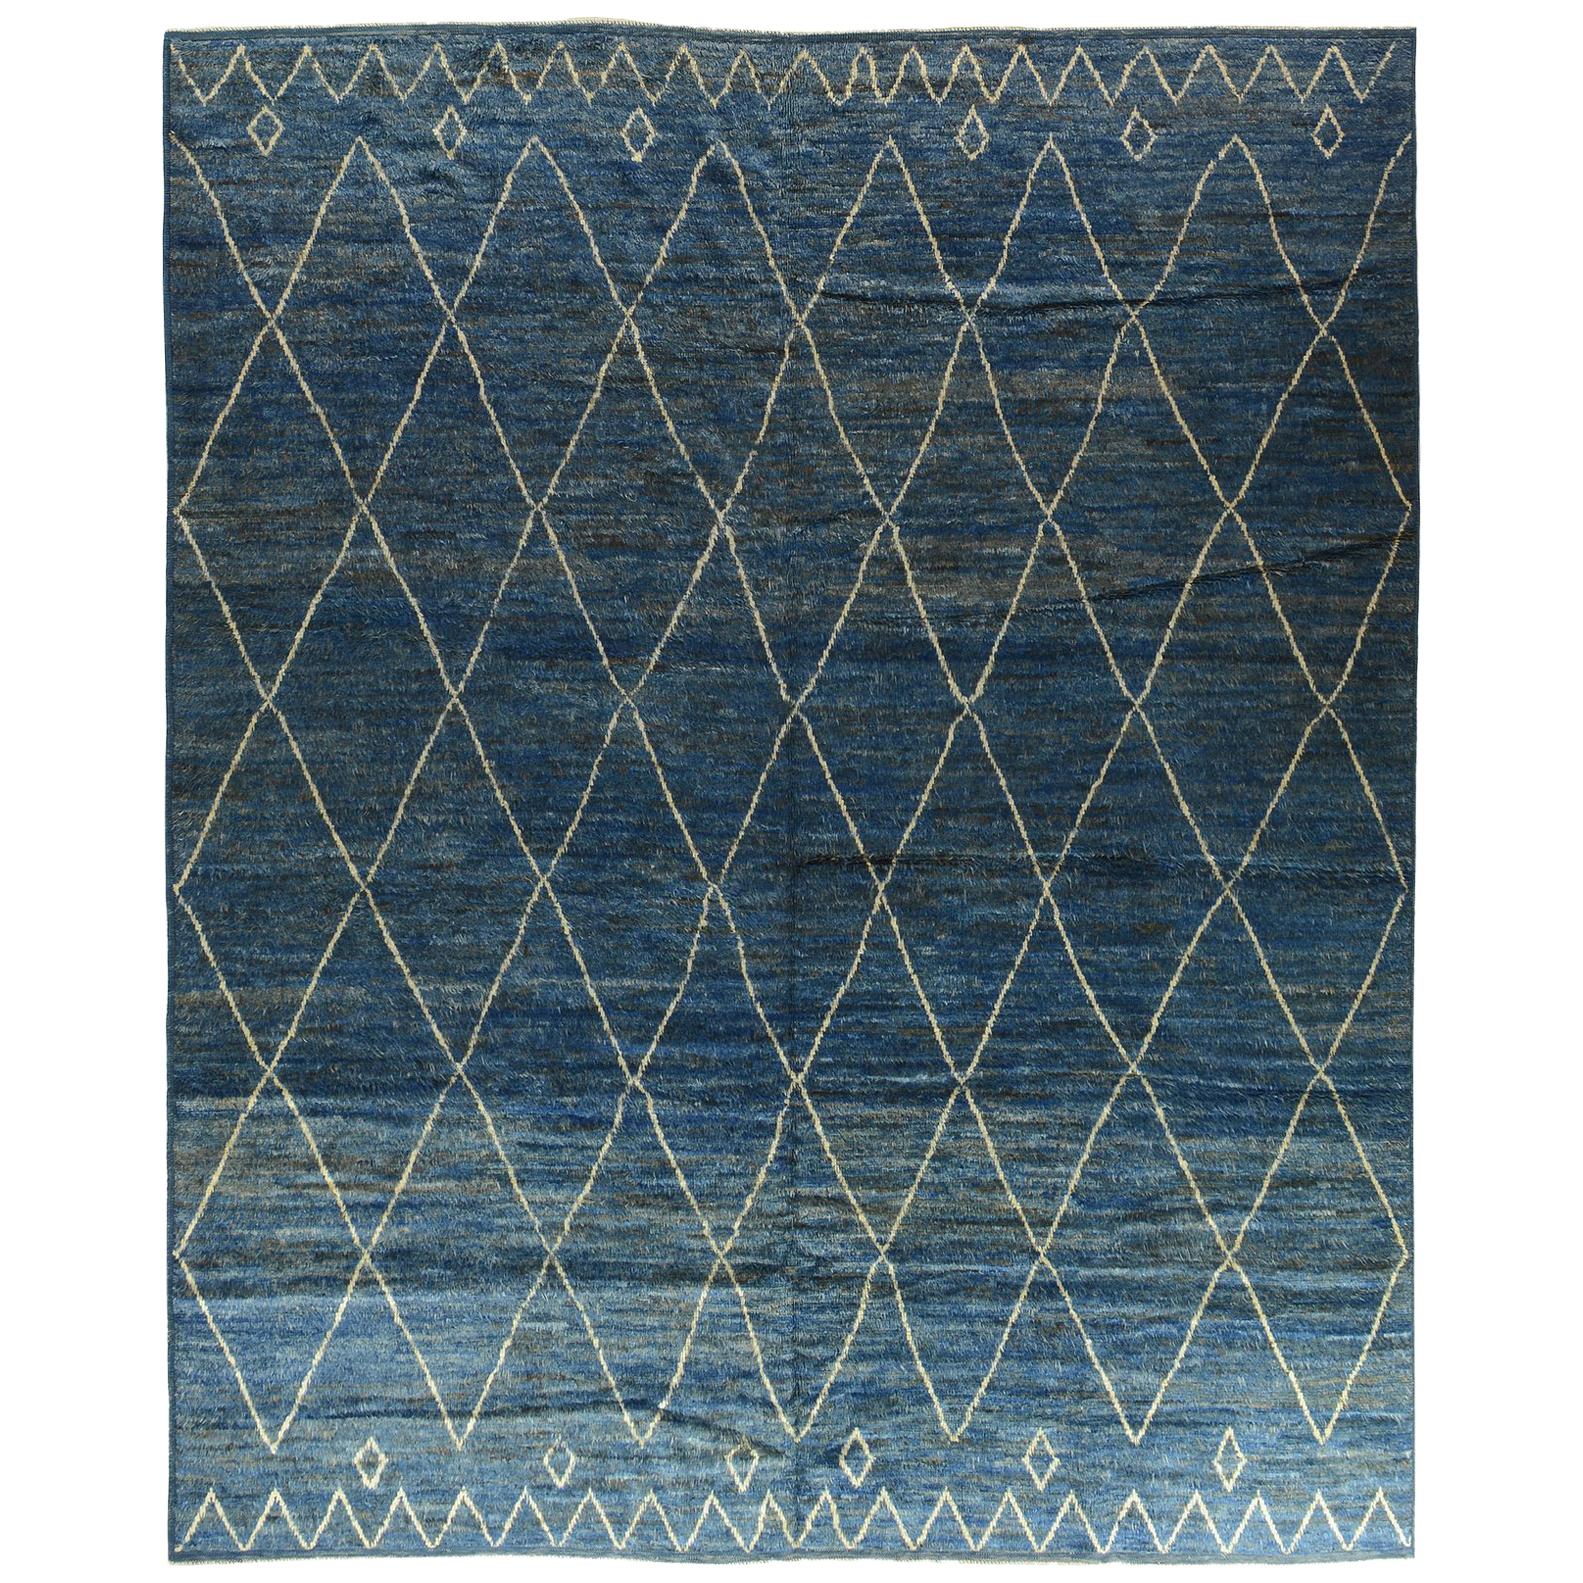 Moroccan Design Blue and Silver Rug